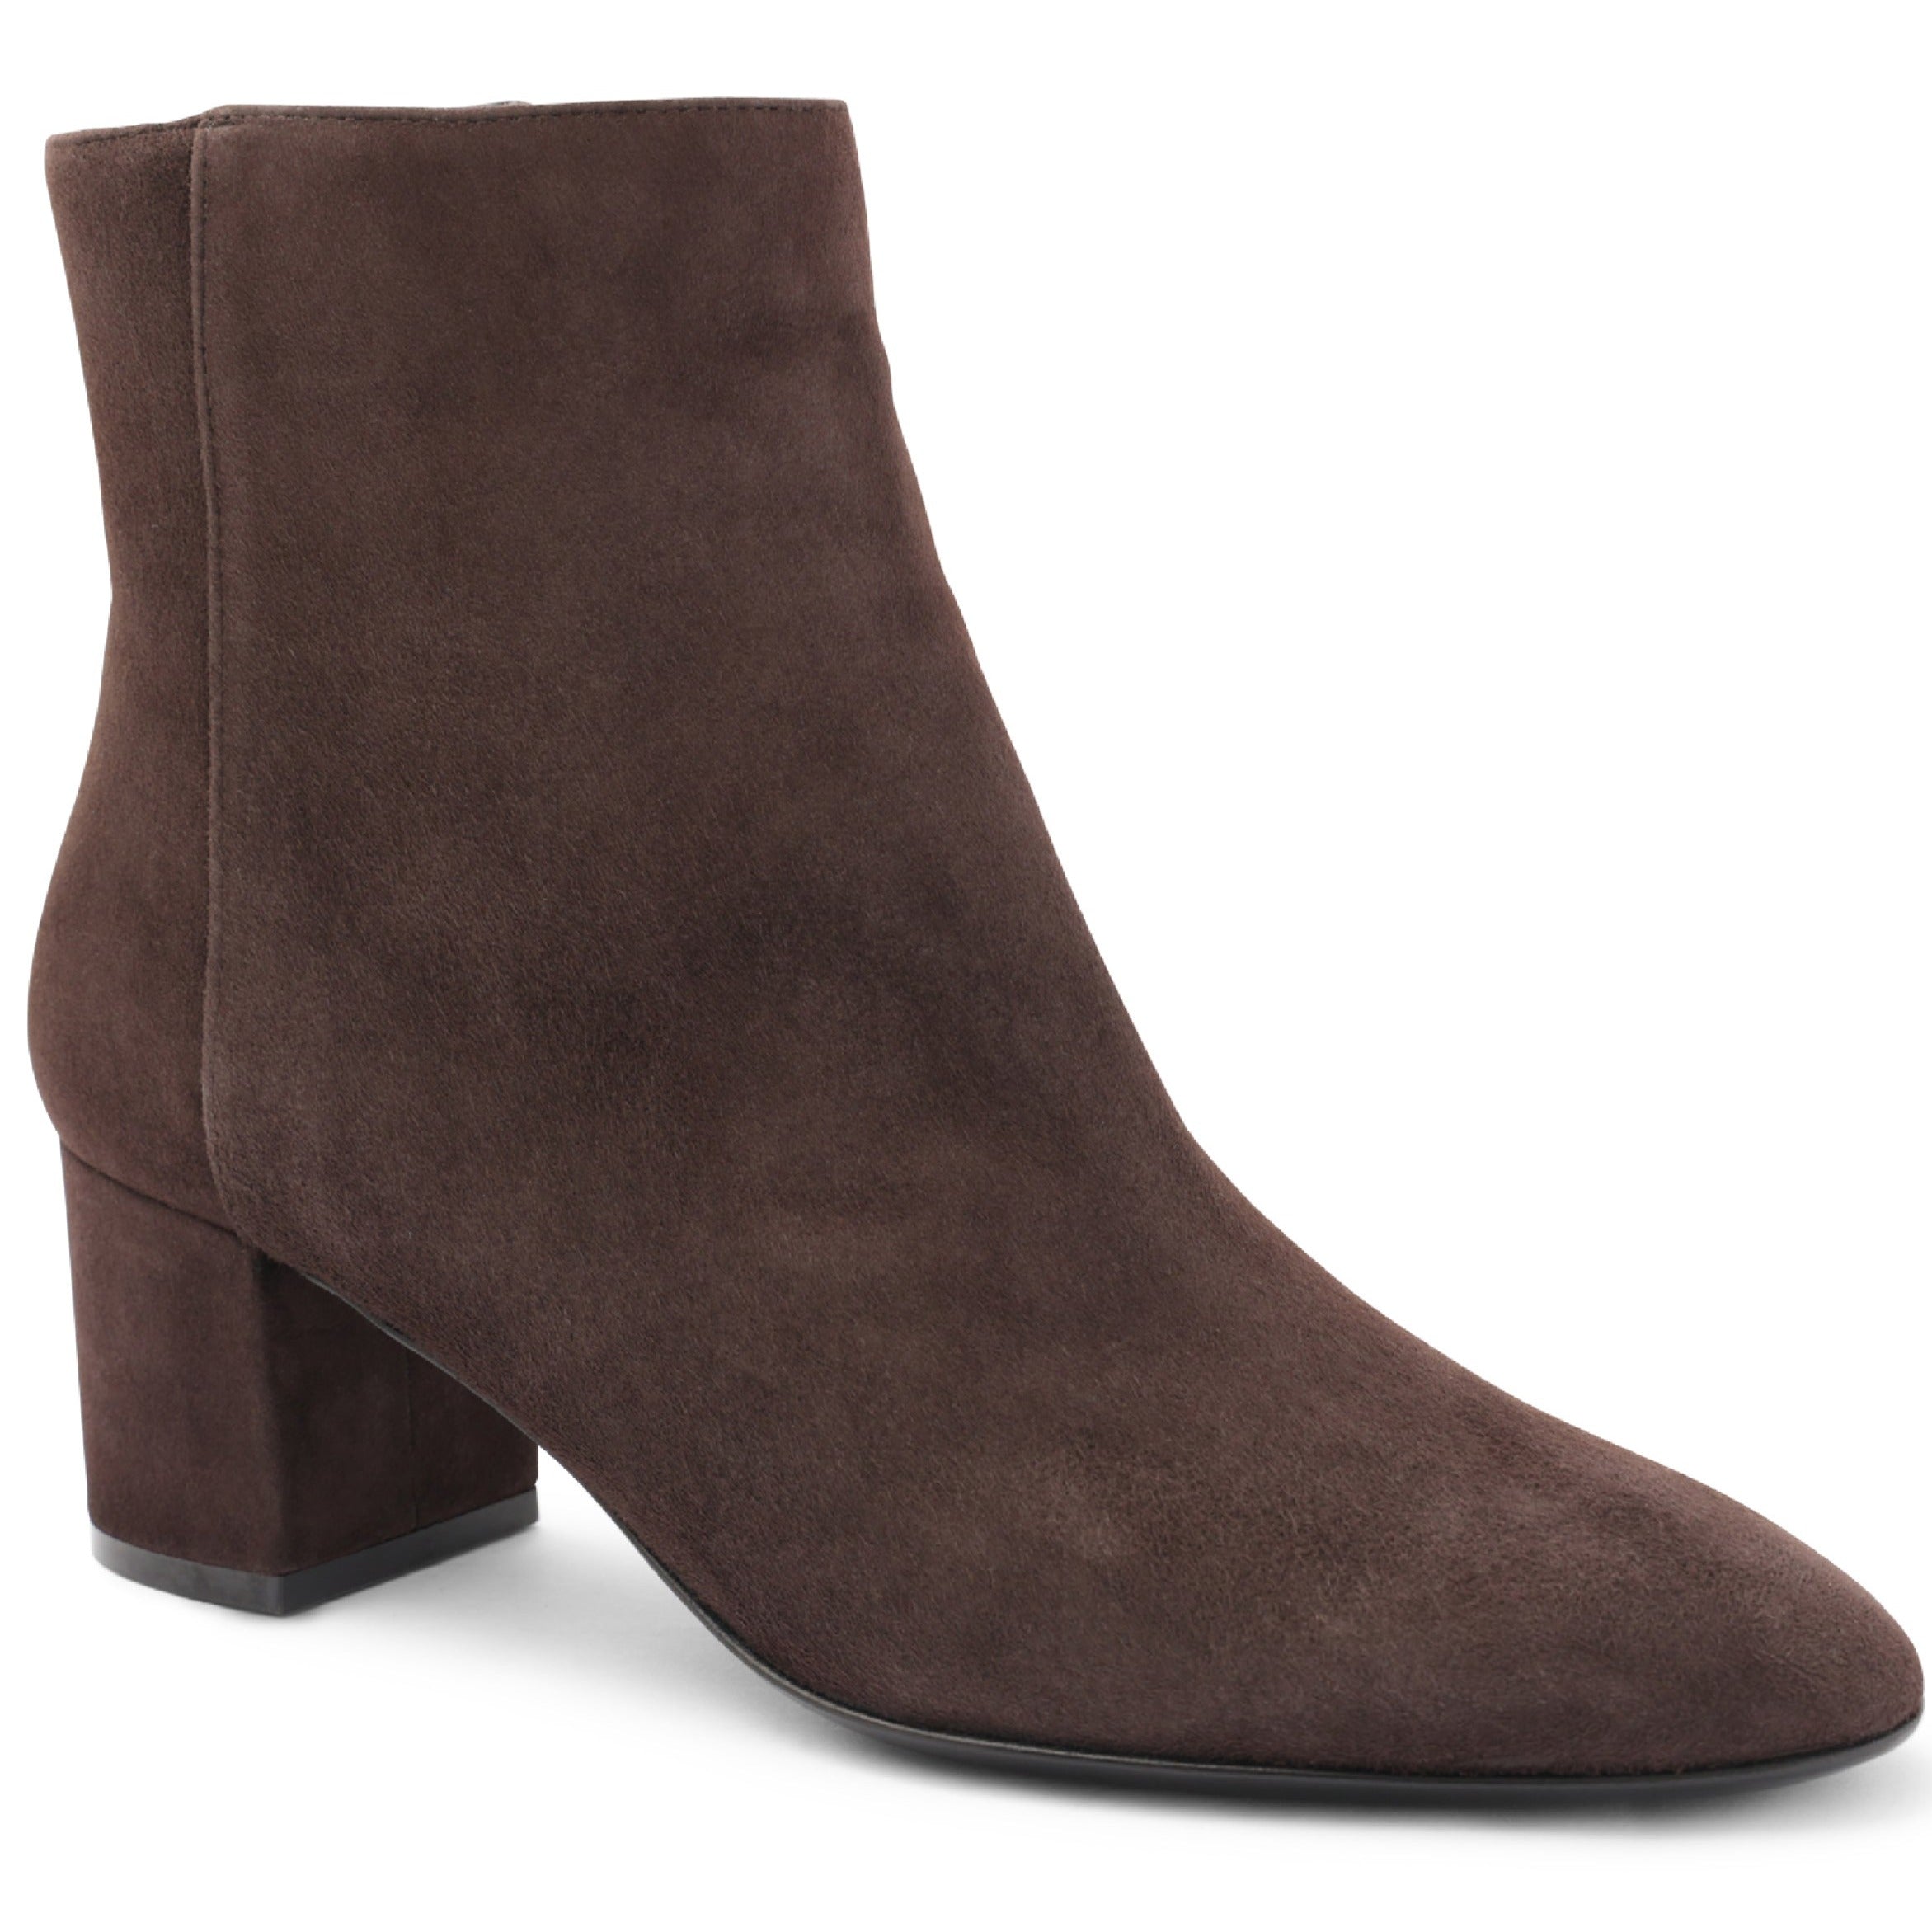 Image of Vinny Suede Ankle Boot - Chocolate